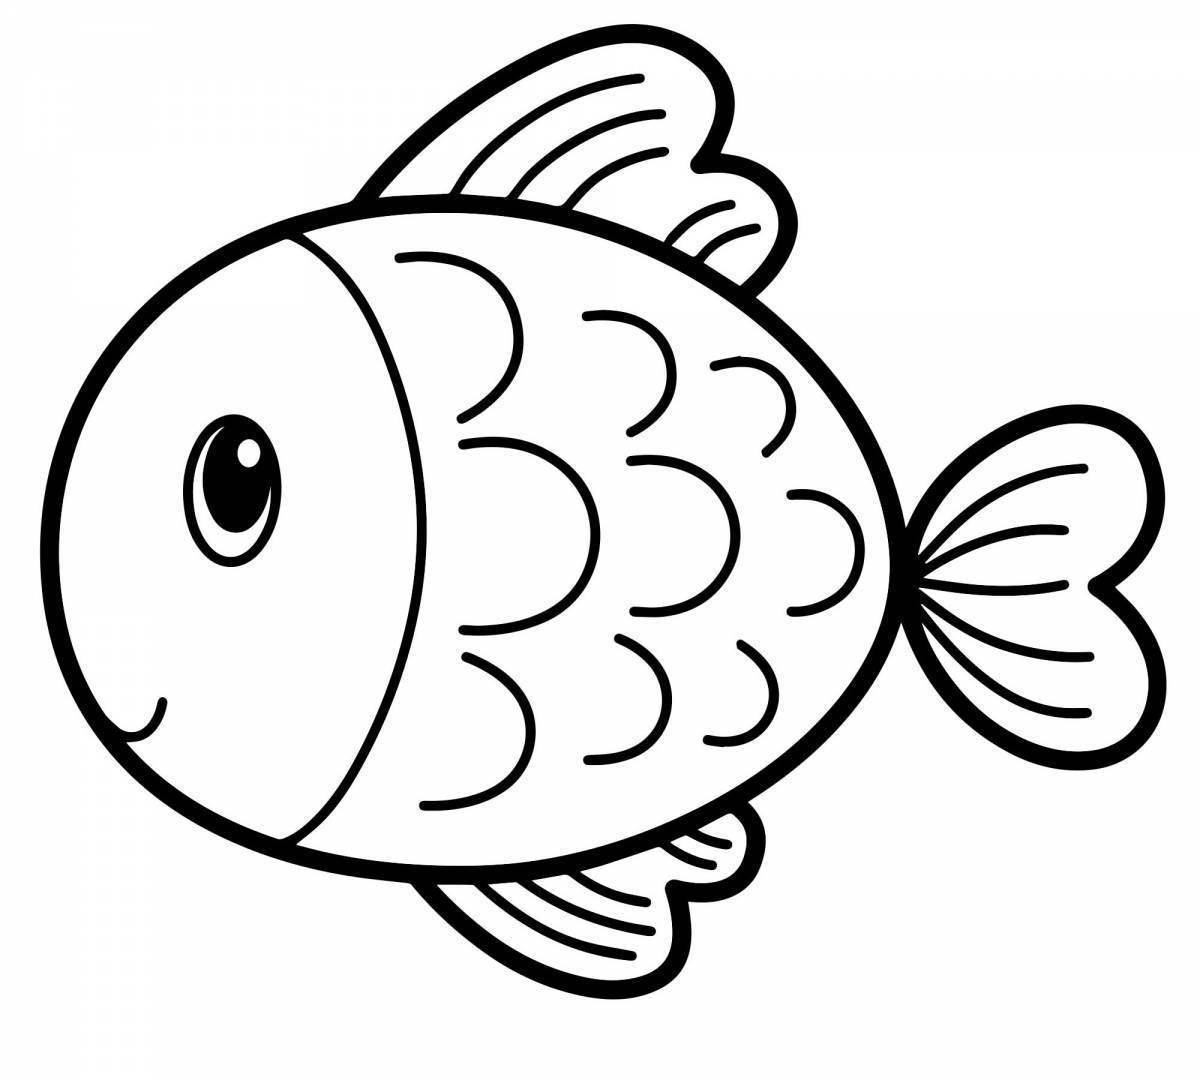 Entertaining coloring fish for children 5-6 years old